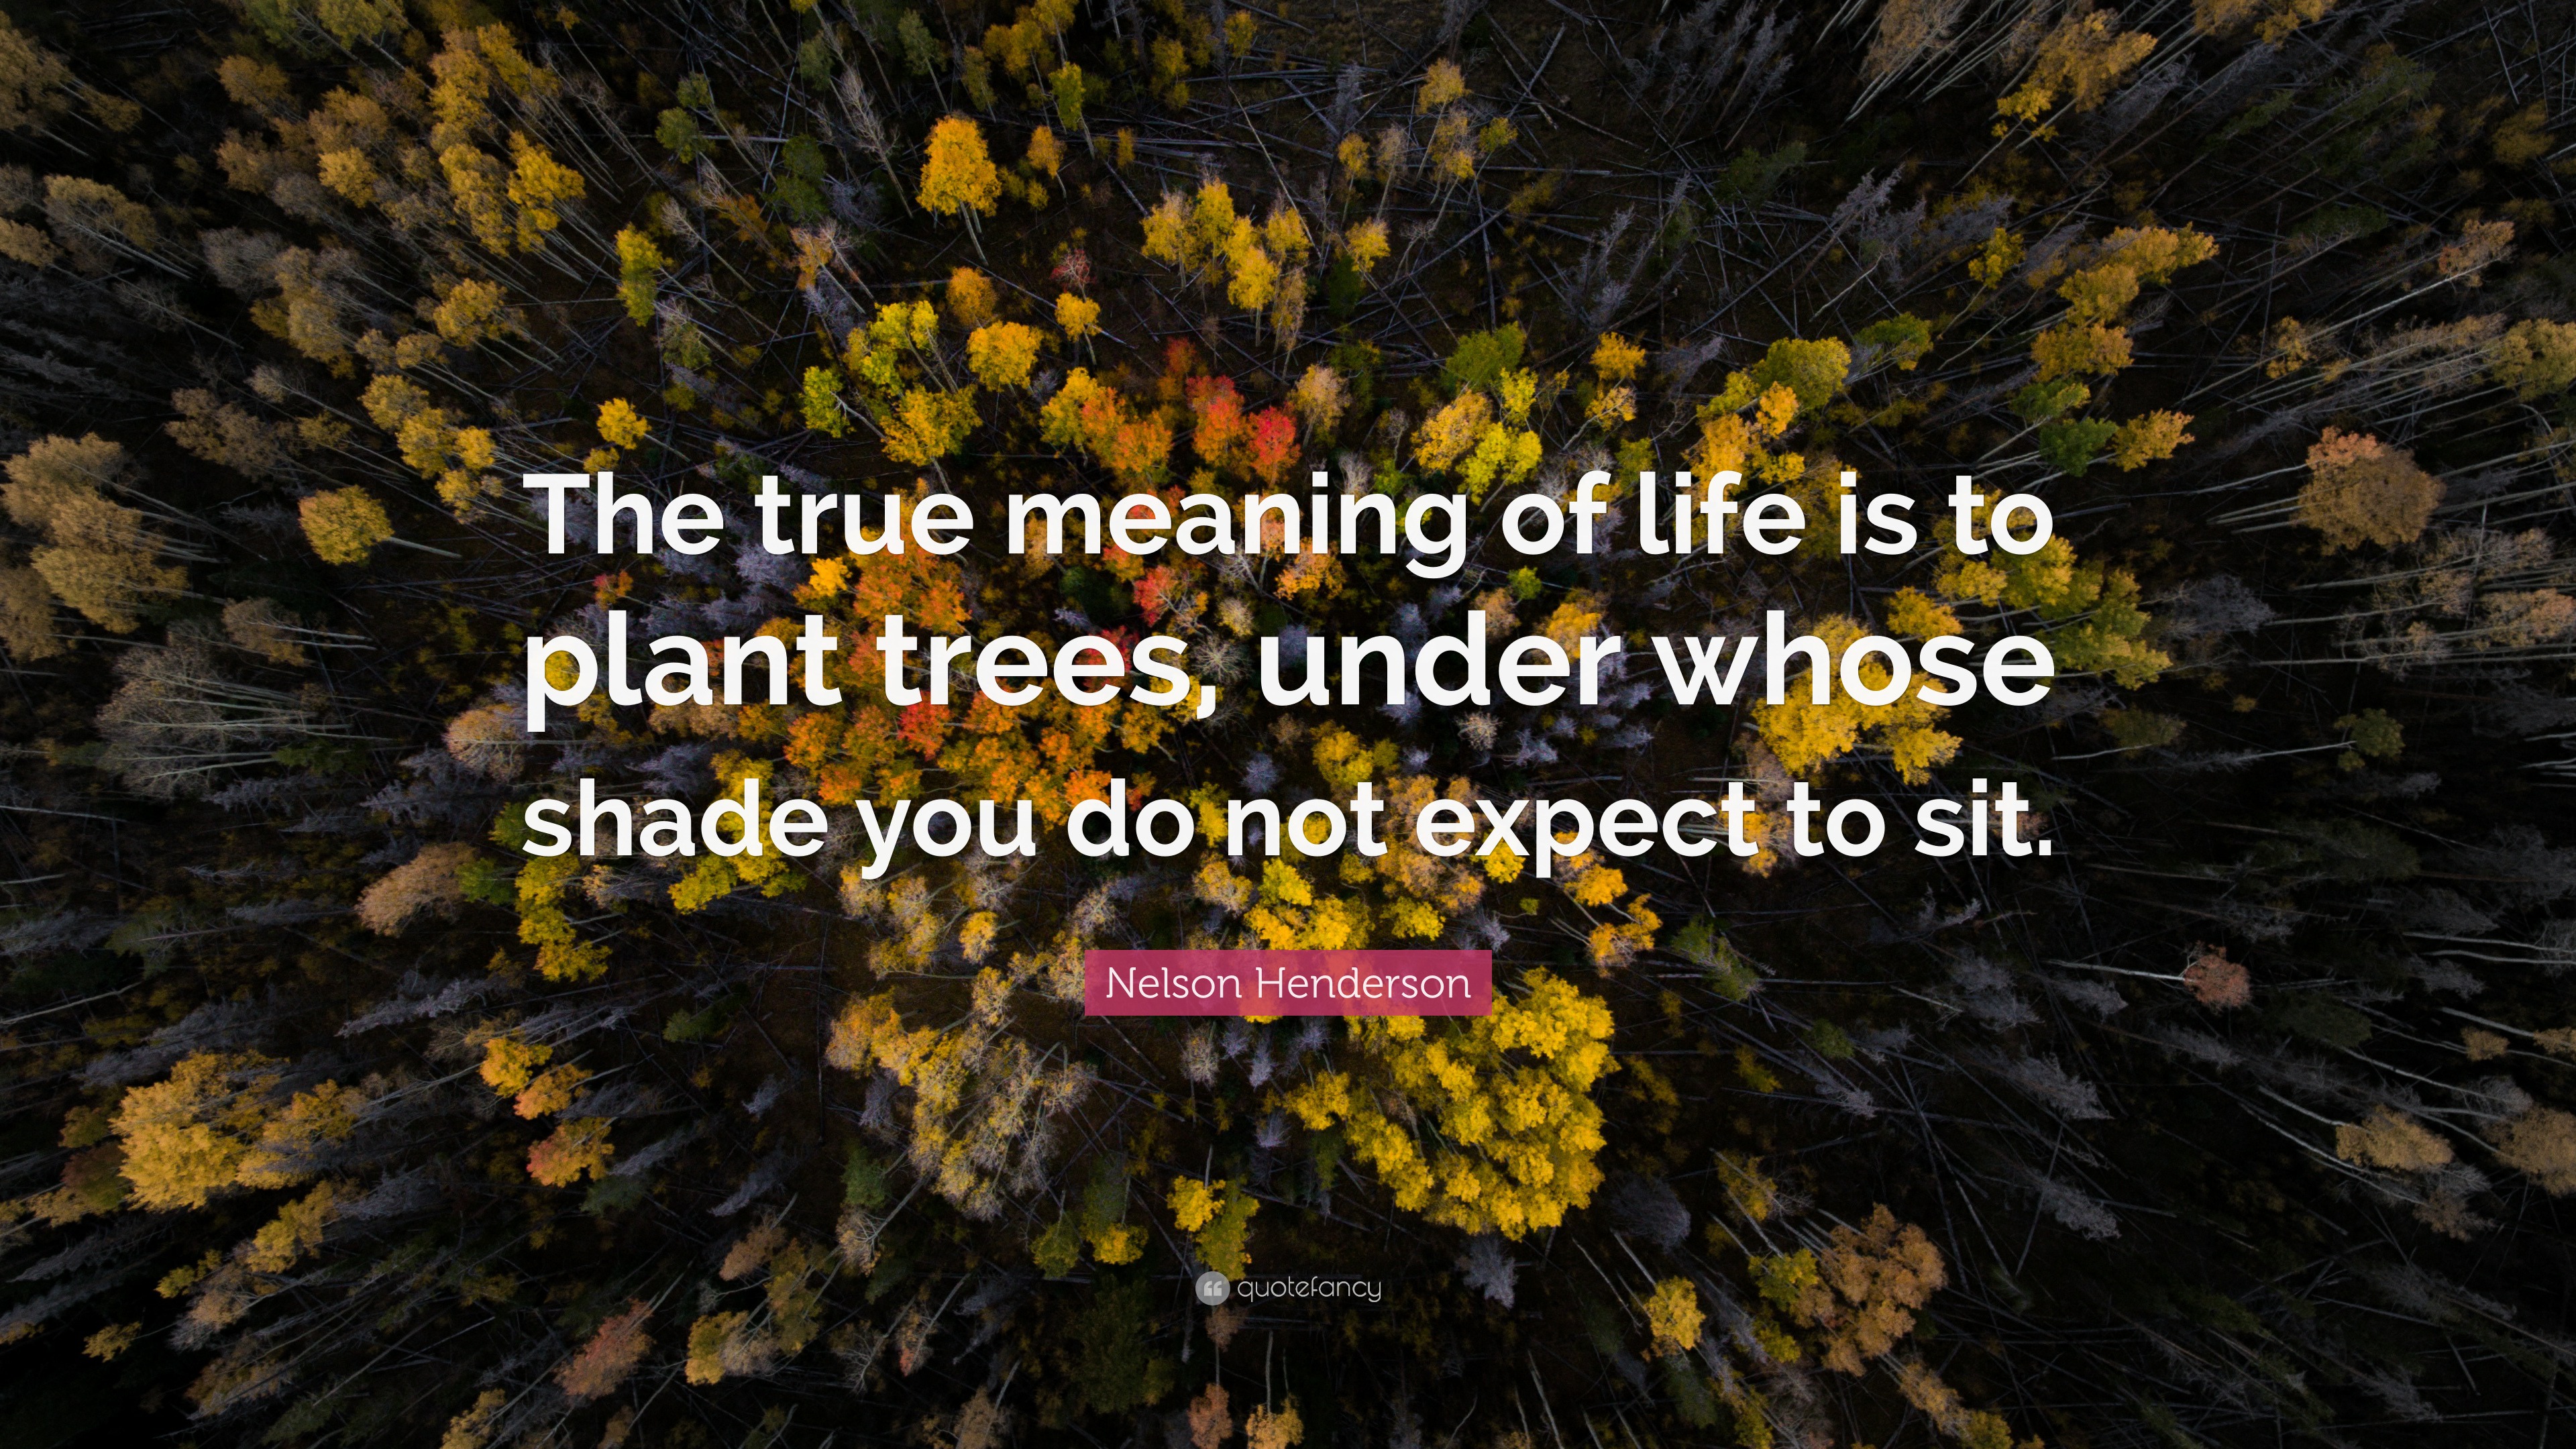 Nelson Henderson Quote: “The true meaning of life is to plant trees